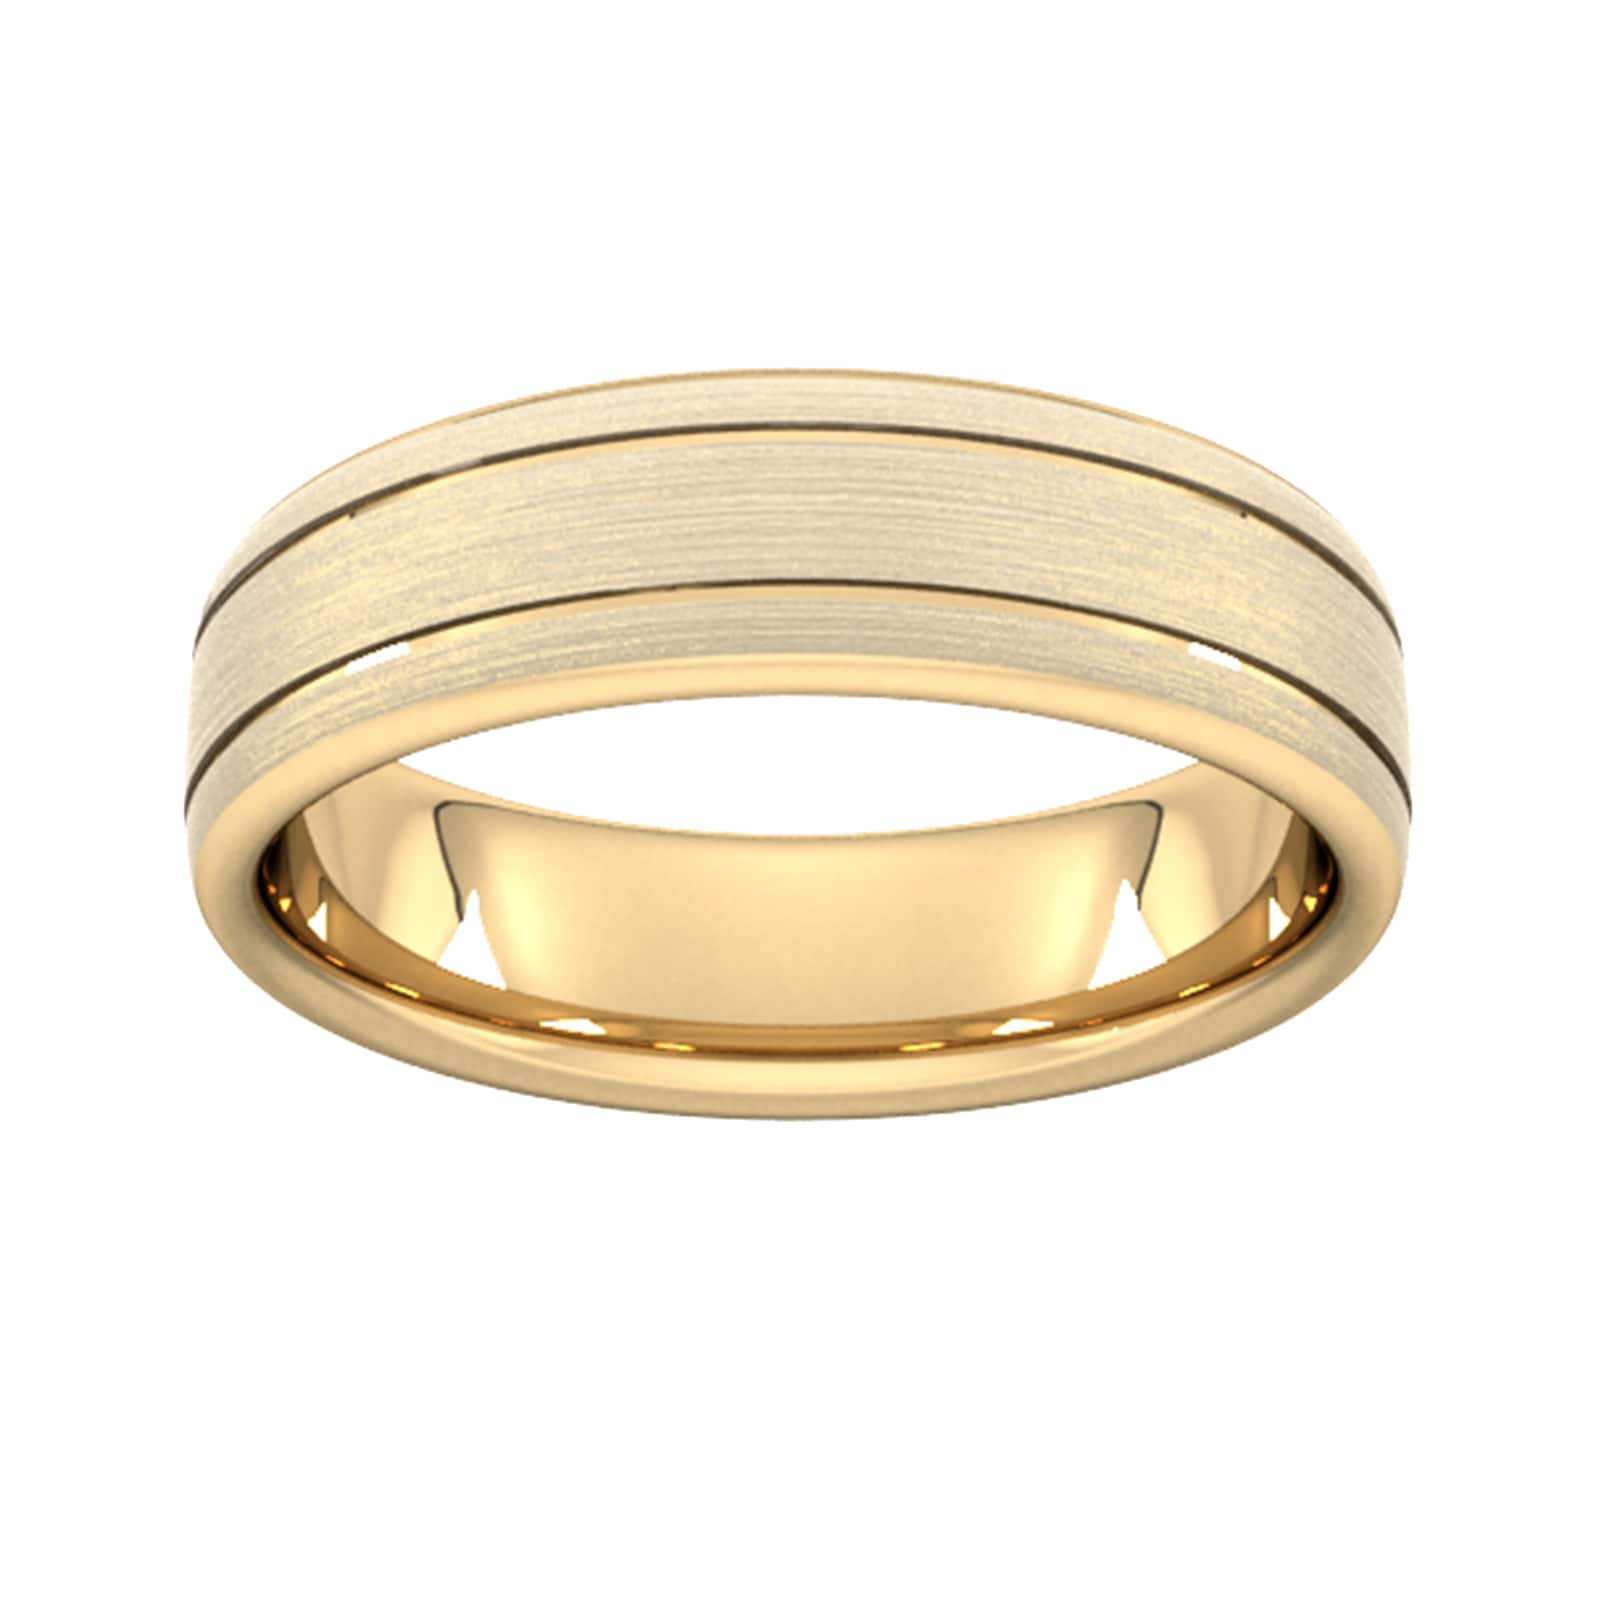 6mm D Shape Standard Matt Finish With Double Grooves Wedding Ring In 18 Carat Yellow Gold - Ring Size K